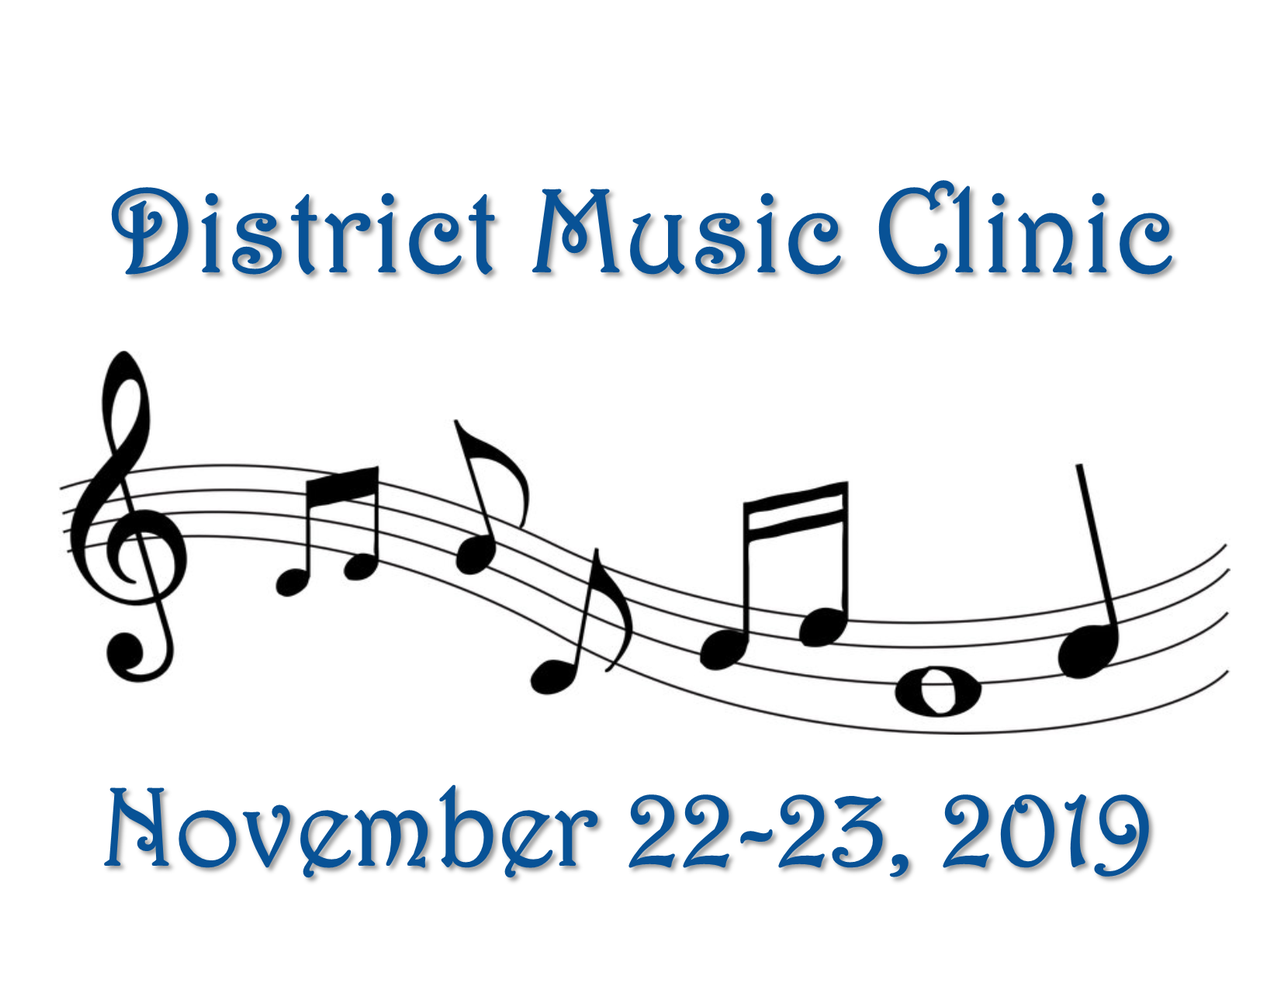 2019 NBHB District Music Clinic image